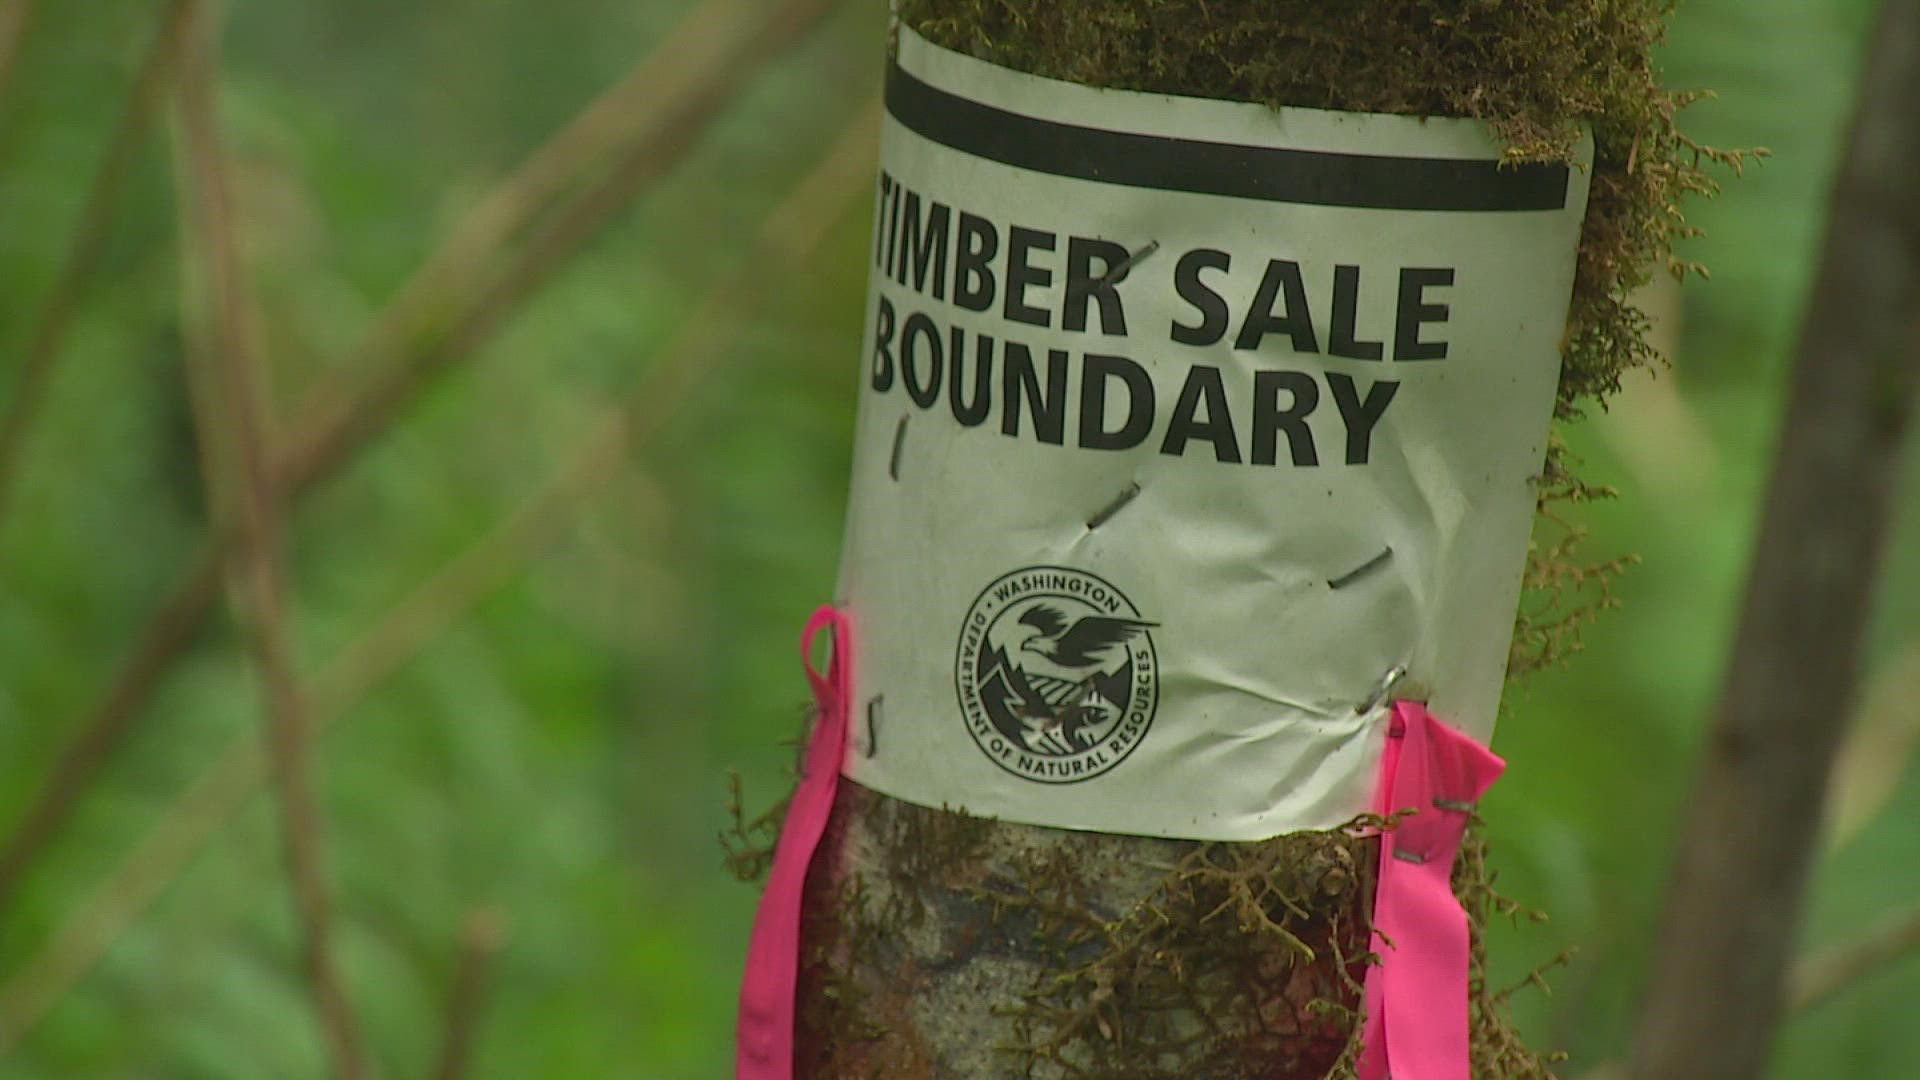 The Washington Department of Natural Resources put plans to harvest 16 acres of timber on hold following concerns by neighbors and Thurston County commissioners.